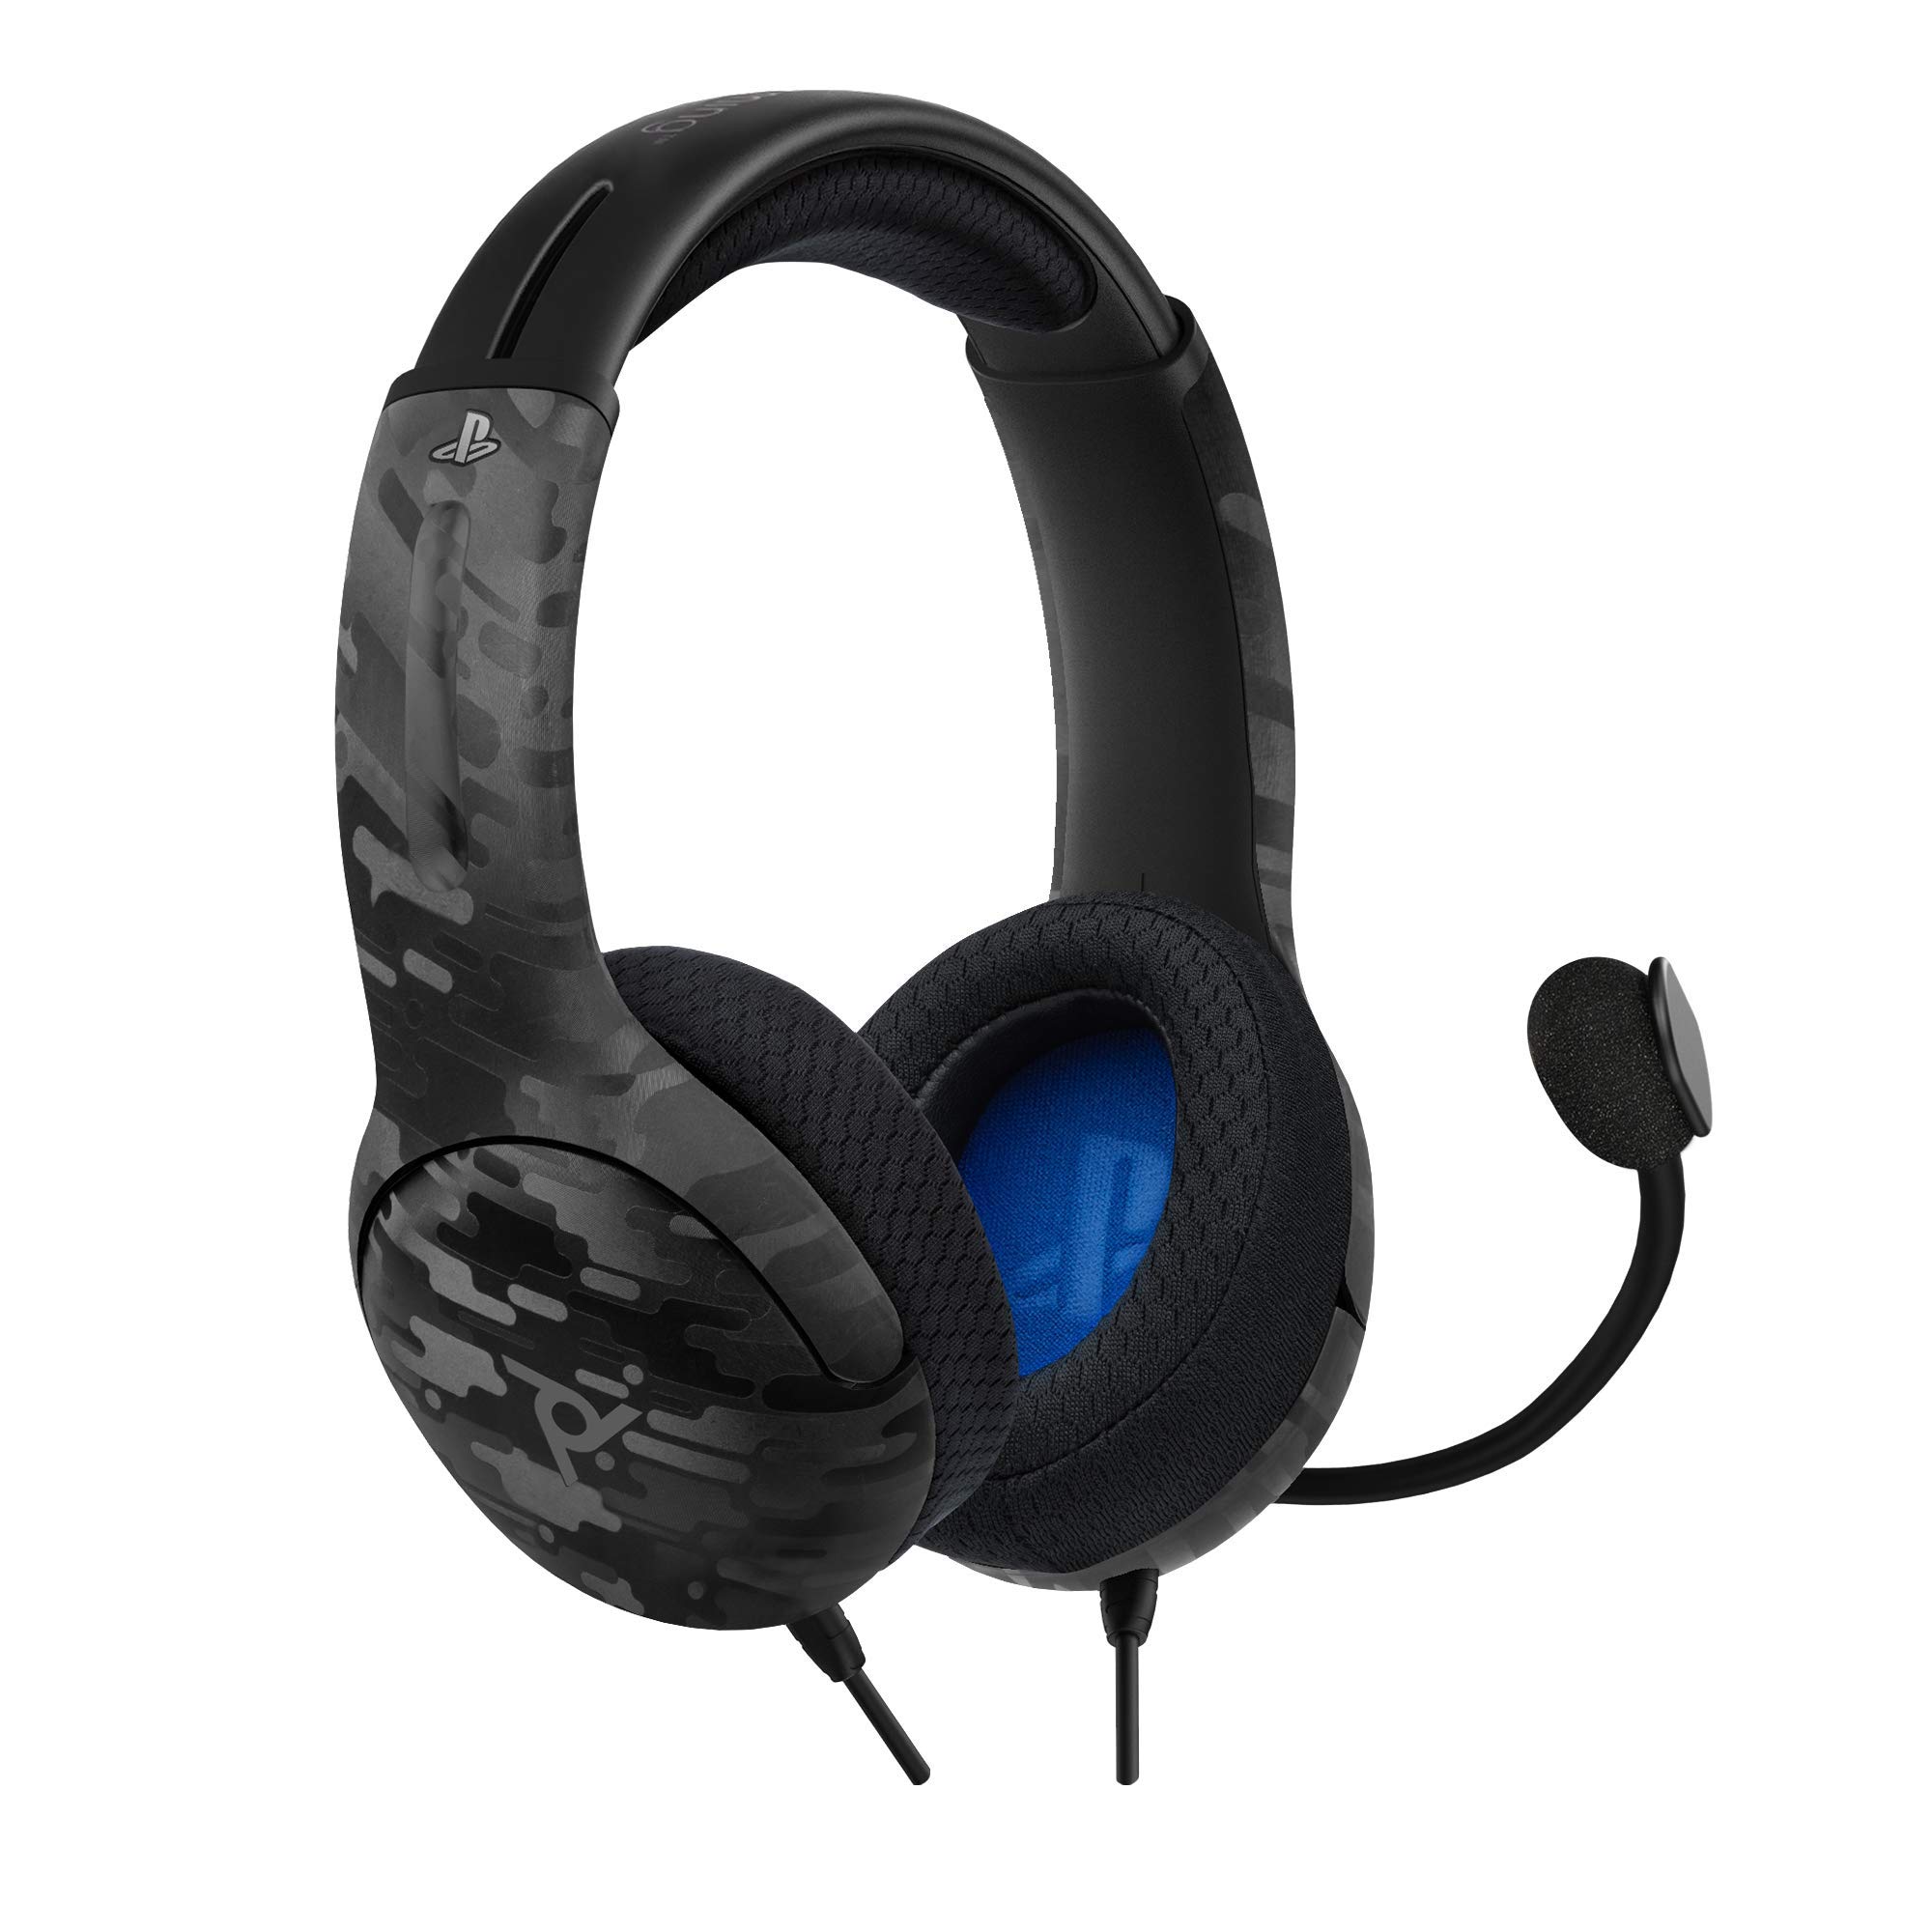 Playstation 5 Headset with Mic - Compatible with PS5, PS4, PC - Black Camo